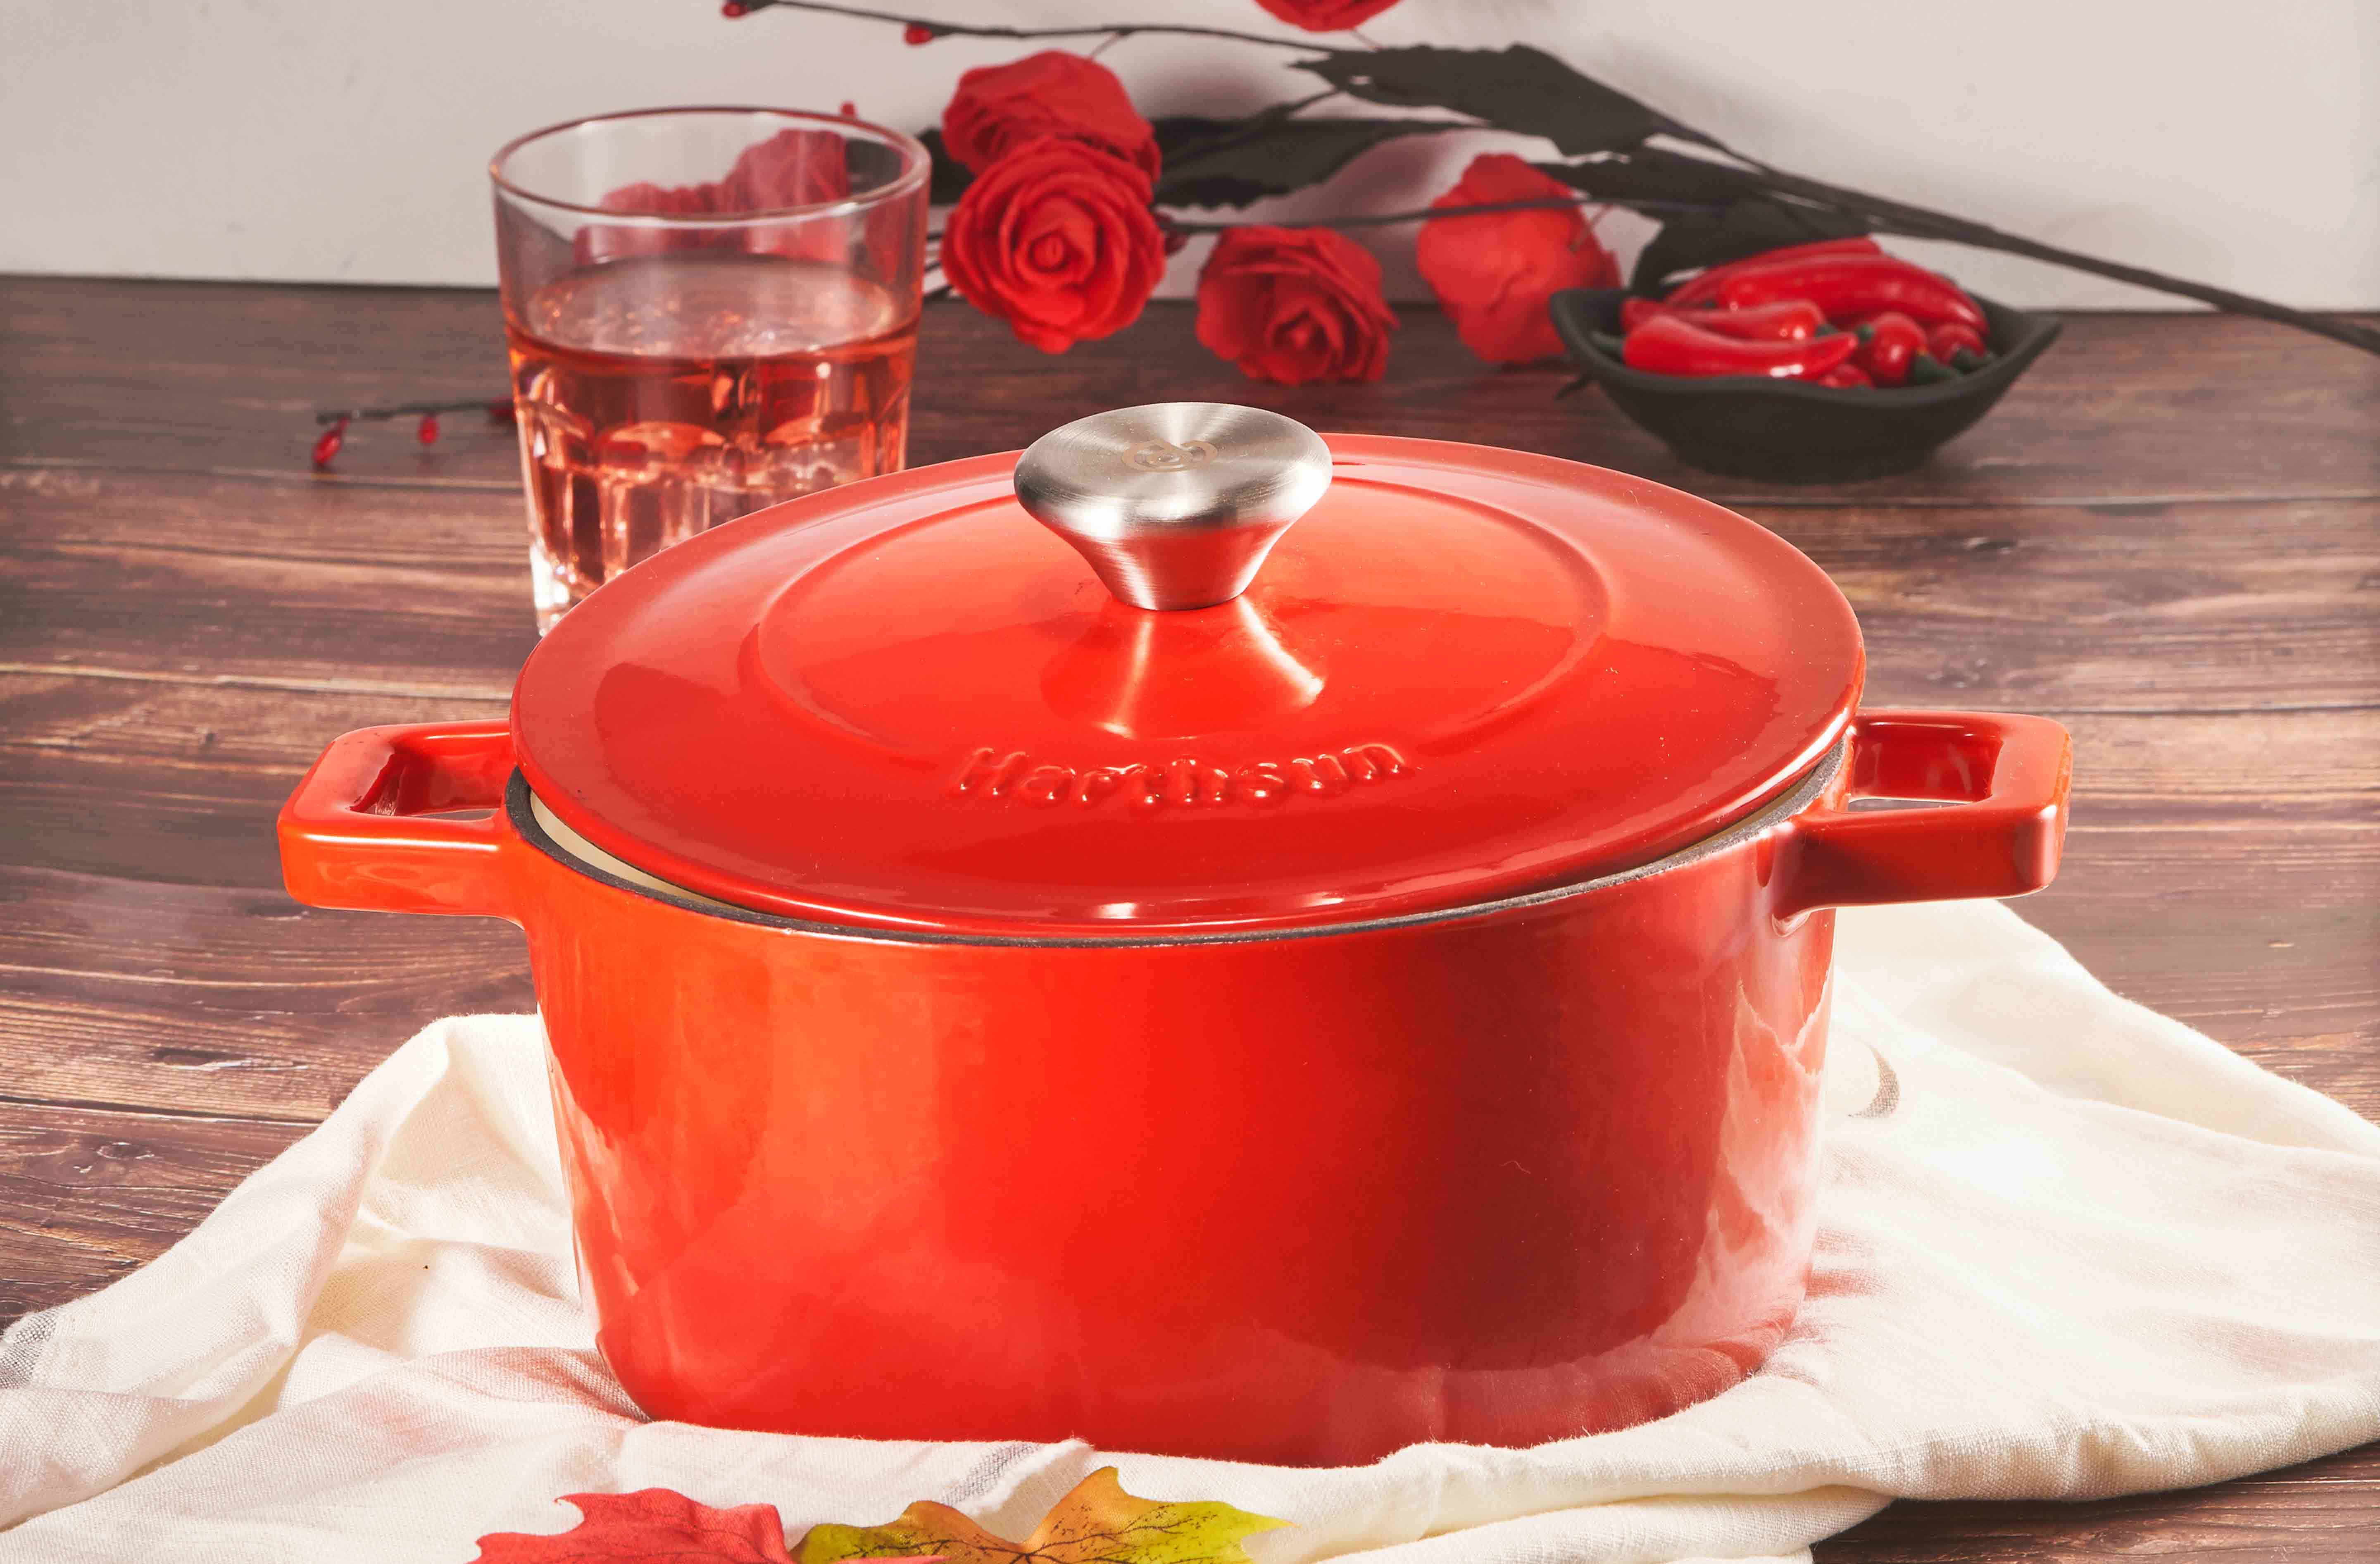 https://www.centercookware.com/wp-content/themes/centercookware/images/product/casserole/round-casserole/round-casserole.jpg